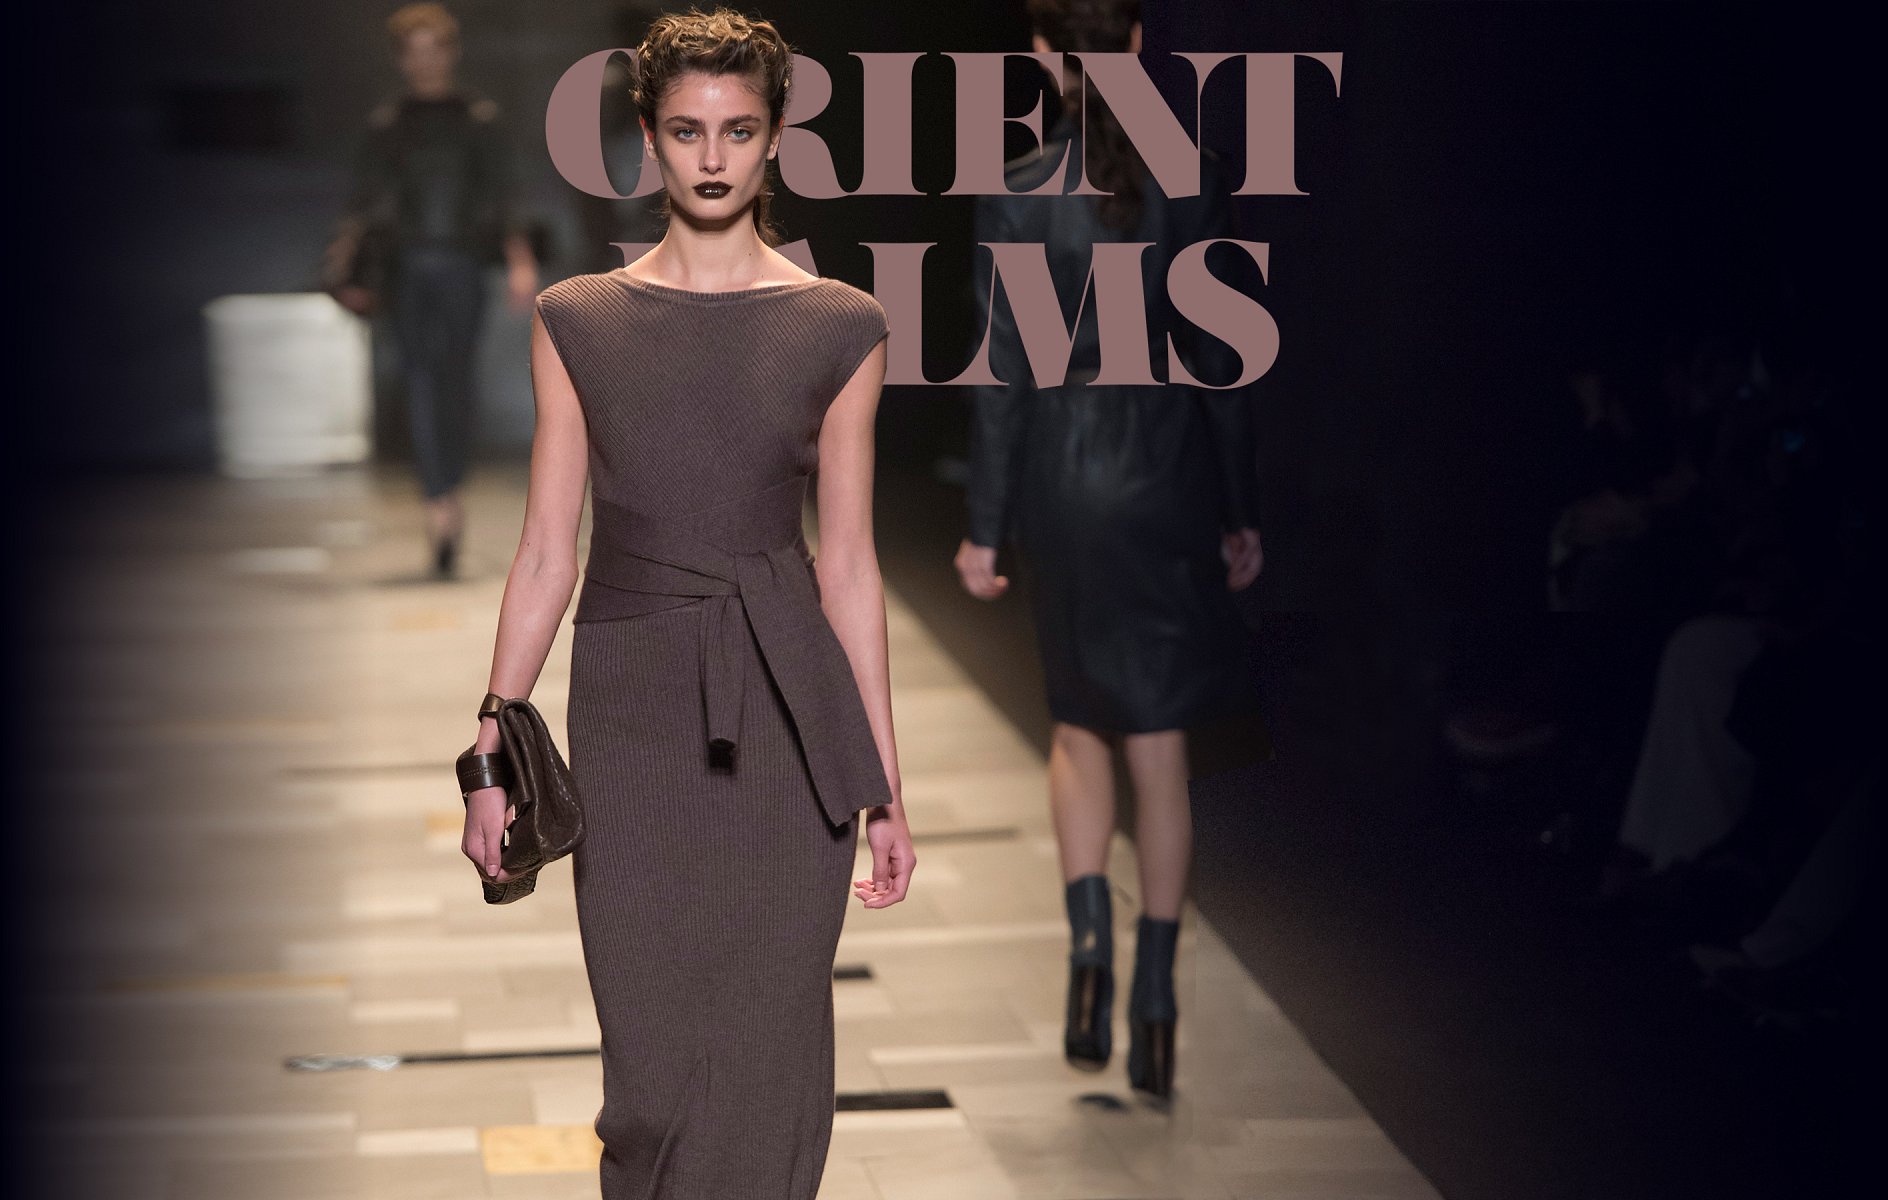 Saint Laurent Fall 2012 Ready-to-Wear Collection